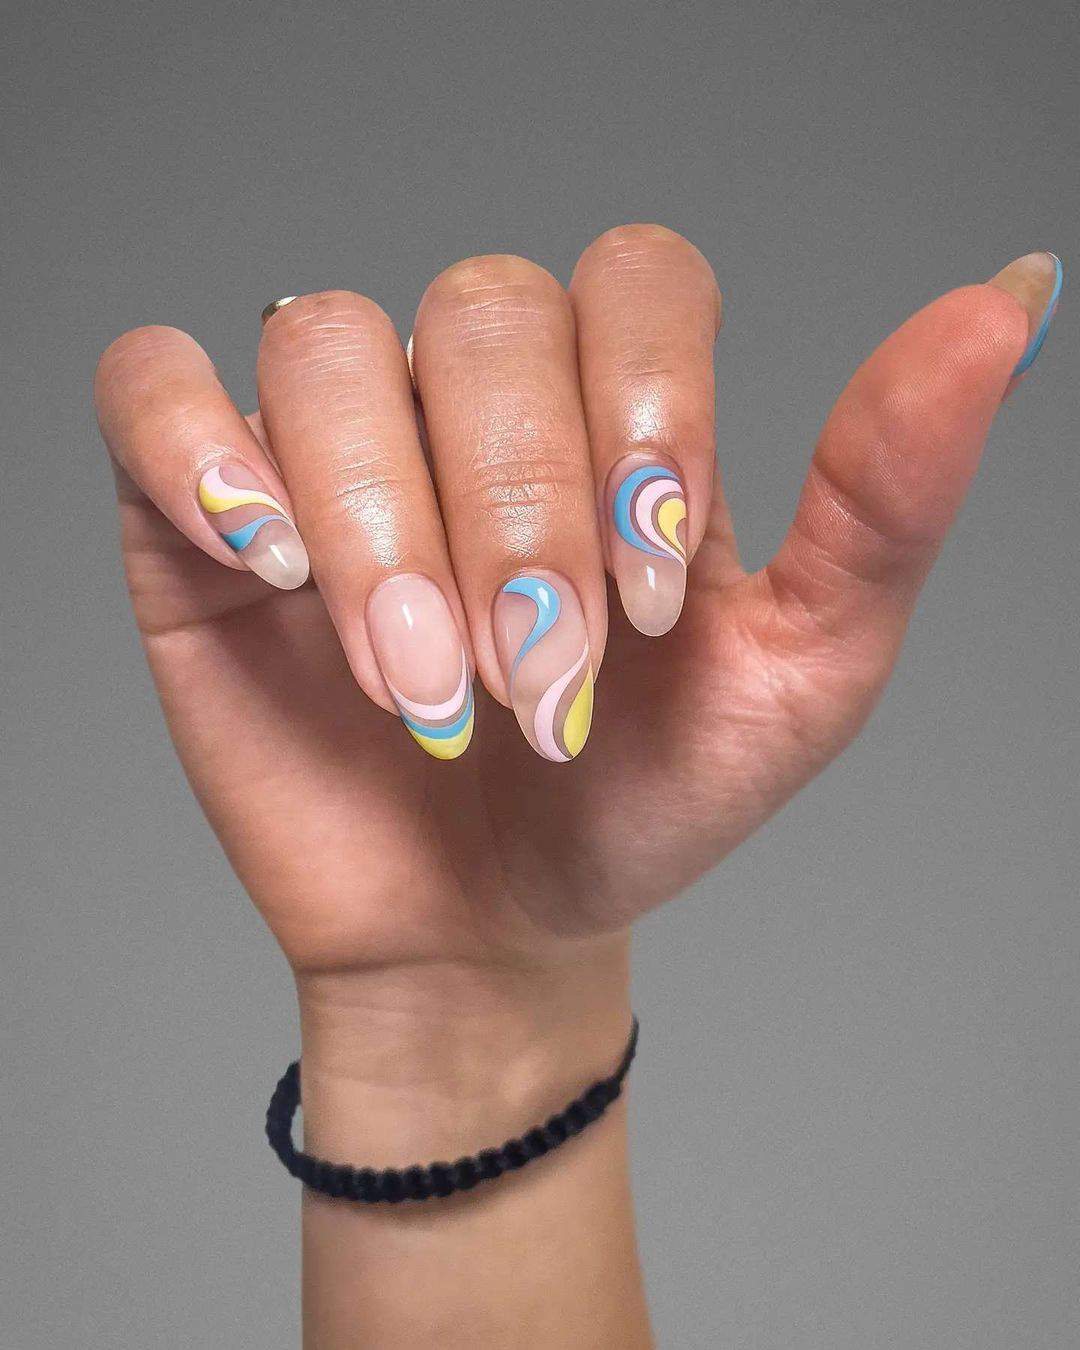 The 100+ Best Nail Designs Trends And Ideas In 2021 images 15